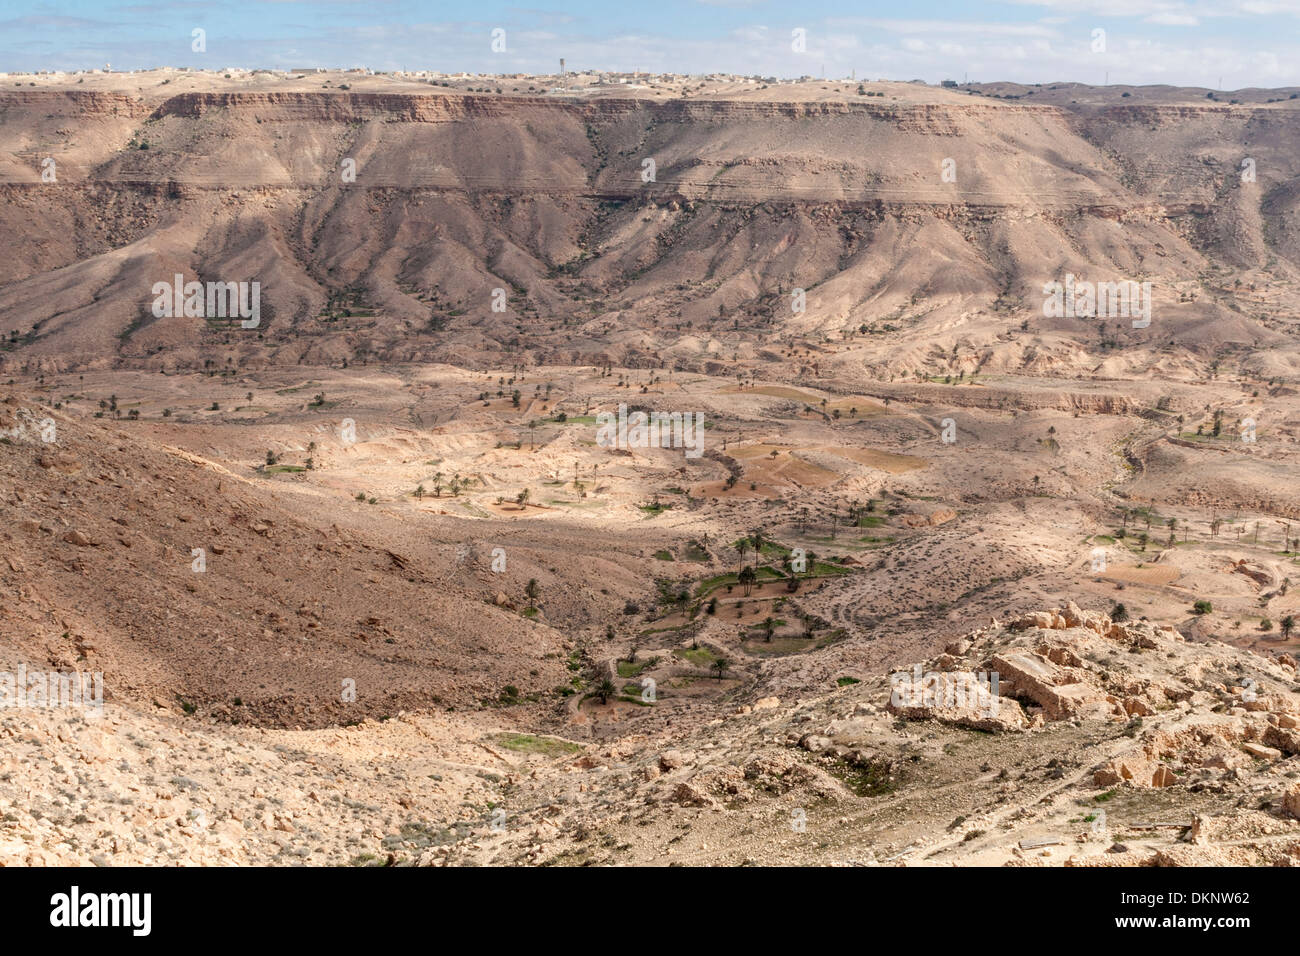 Libya, Jebel Nefusa. Earthen Berms Create Terraces to Conserve Rainwater Flow for Agricultural Use. Stock Photo